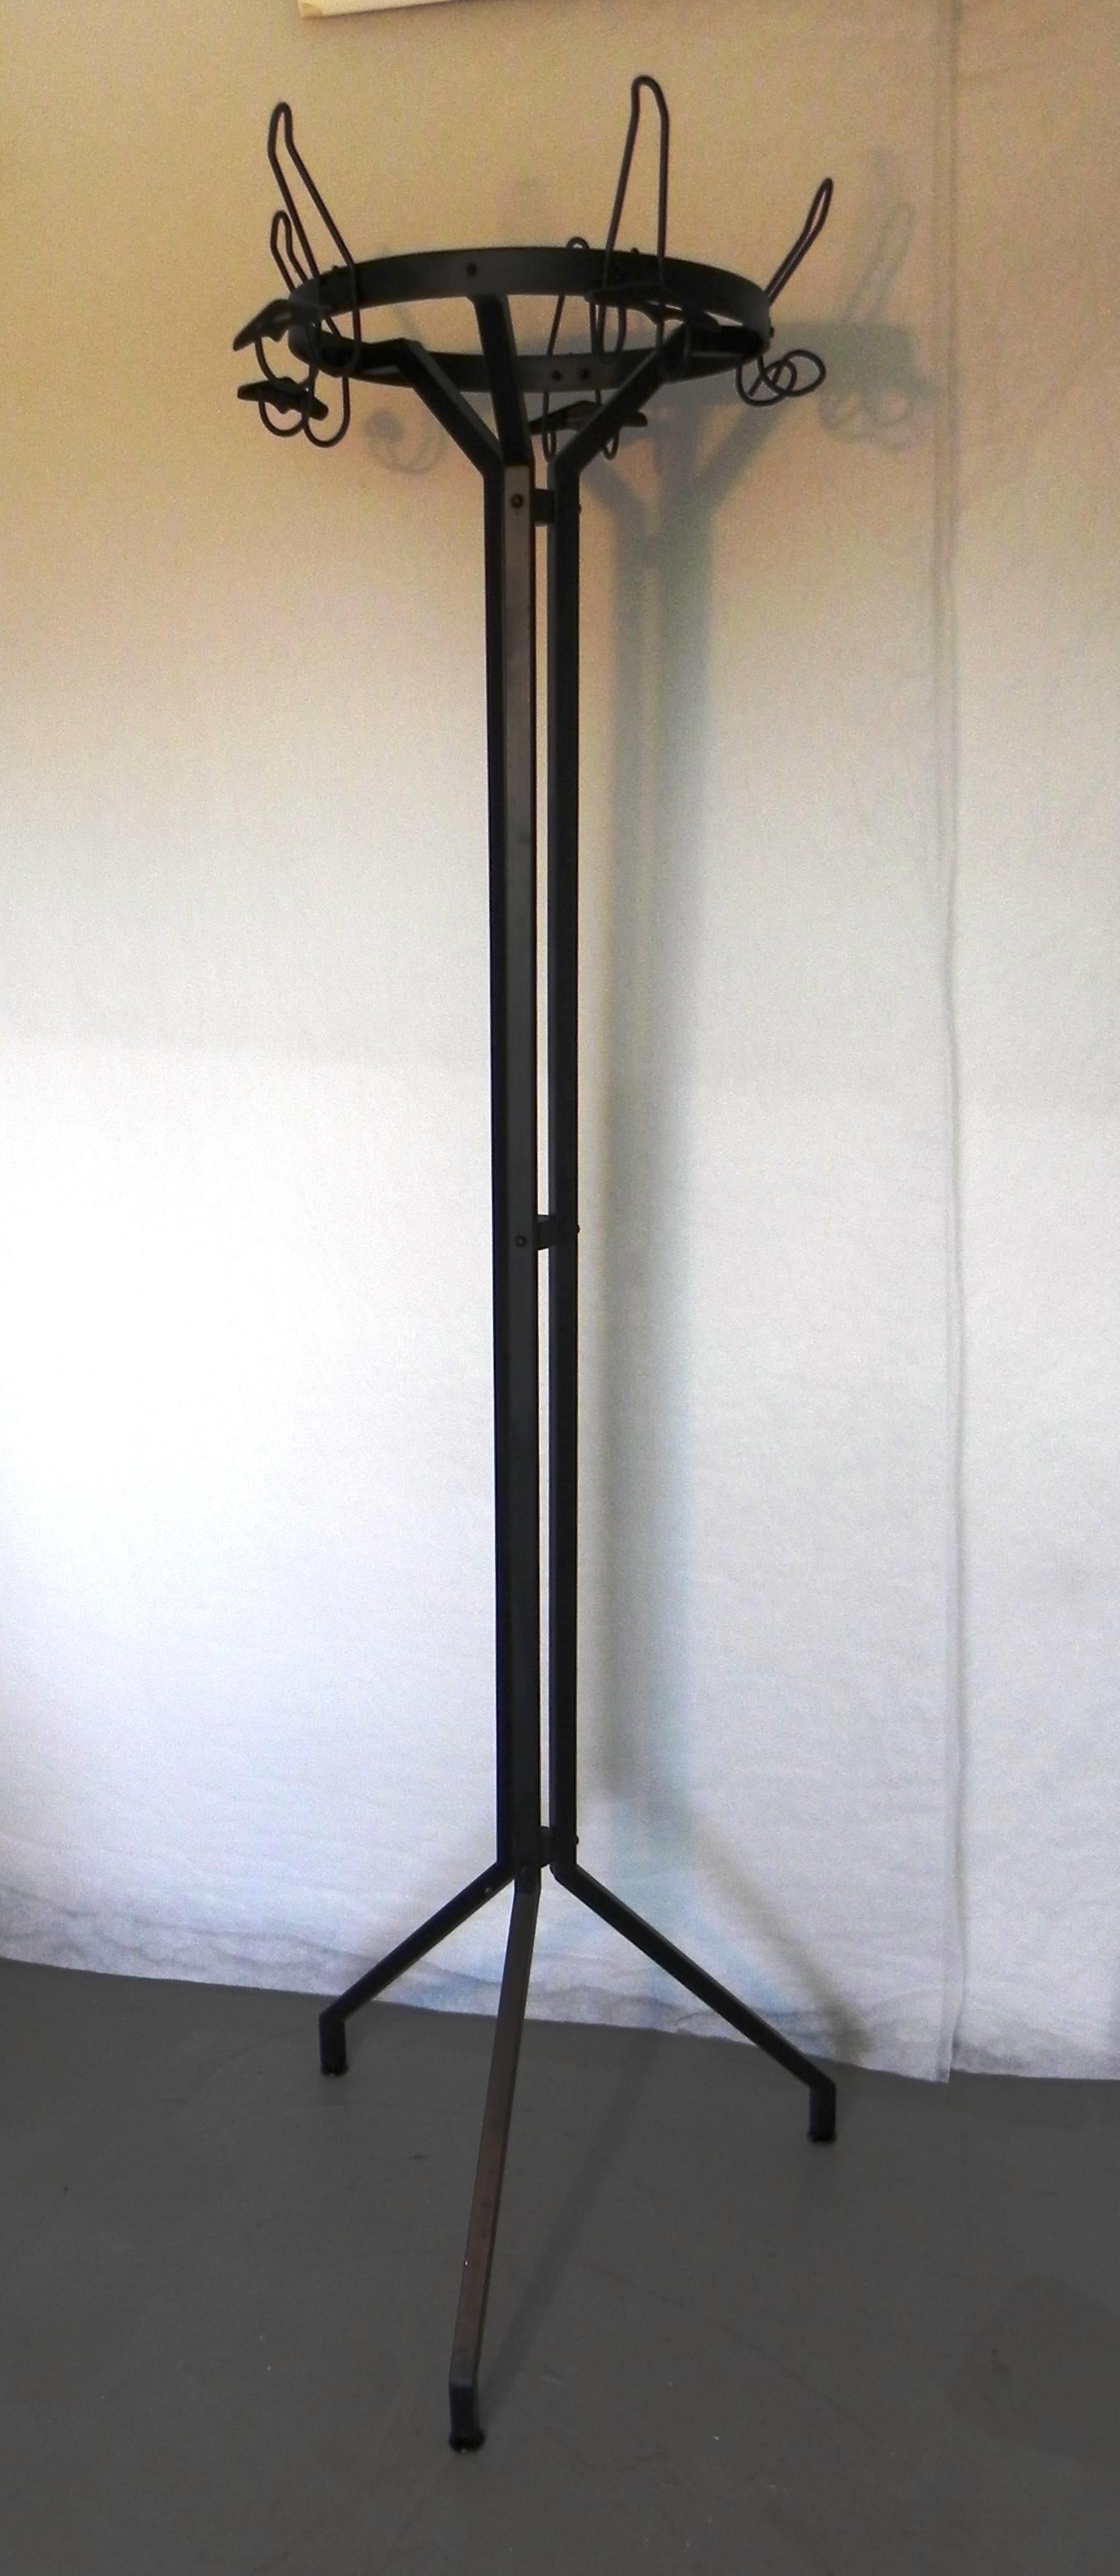 industrial style coat rack , 1960s. all black painted iron. stable and sturdy.